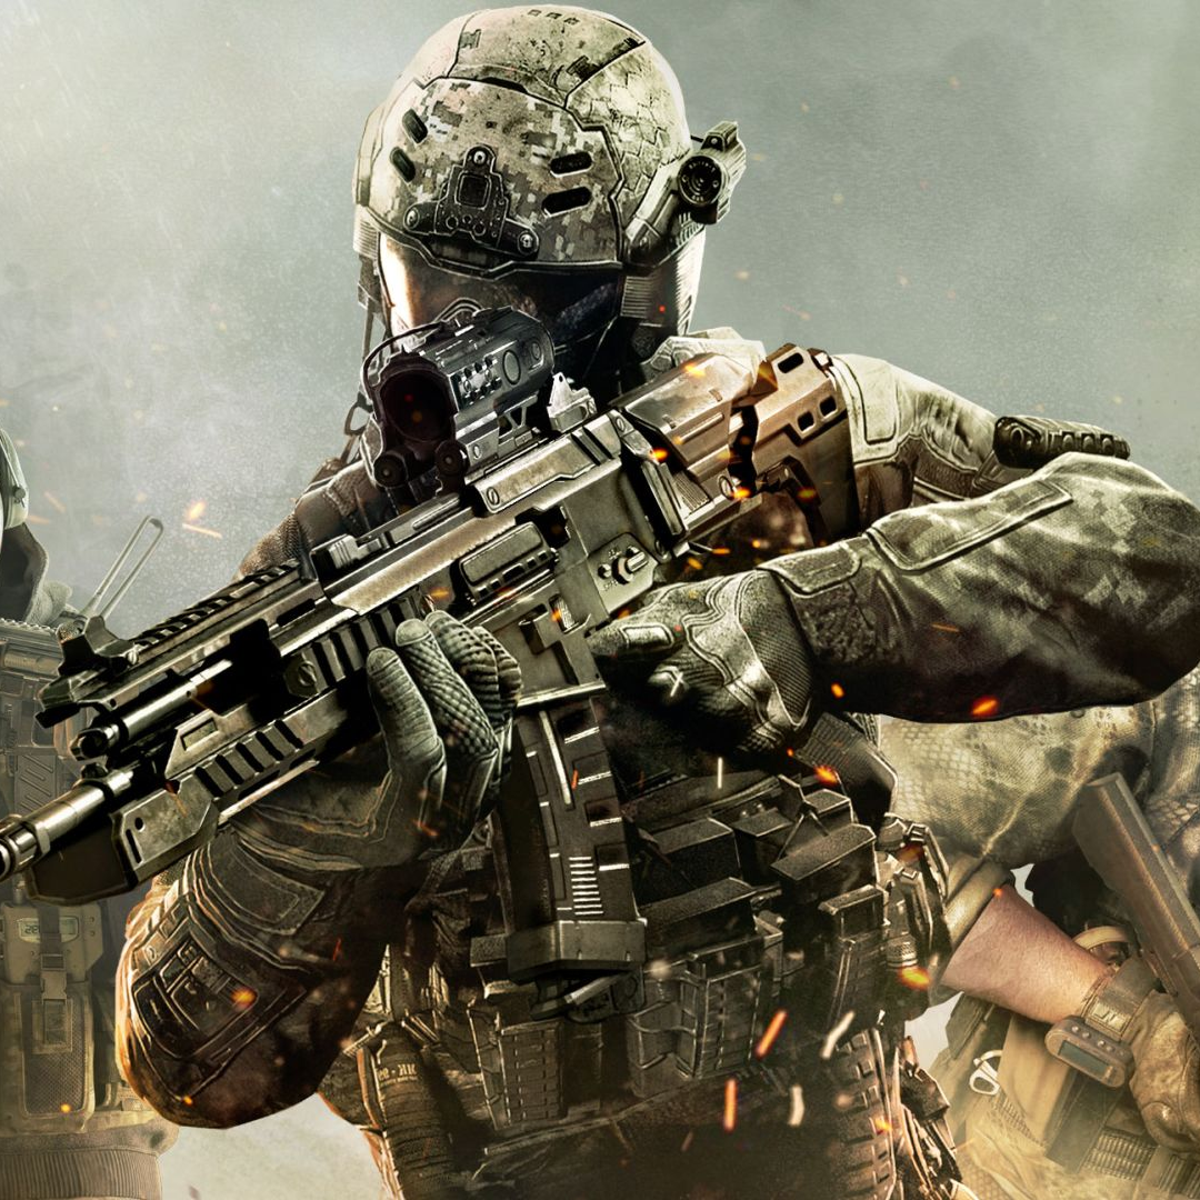 Call of Duty Mobile Reaches 650 Million Downloads, Matches PC and Console  Player Base